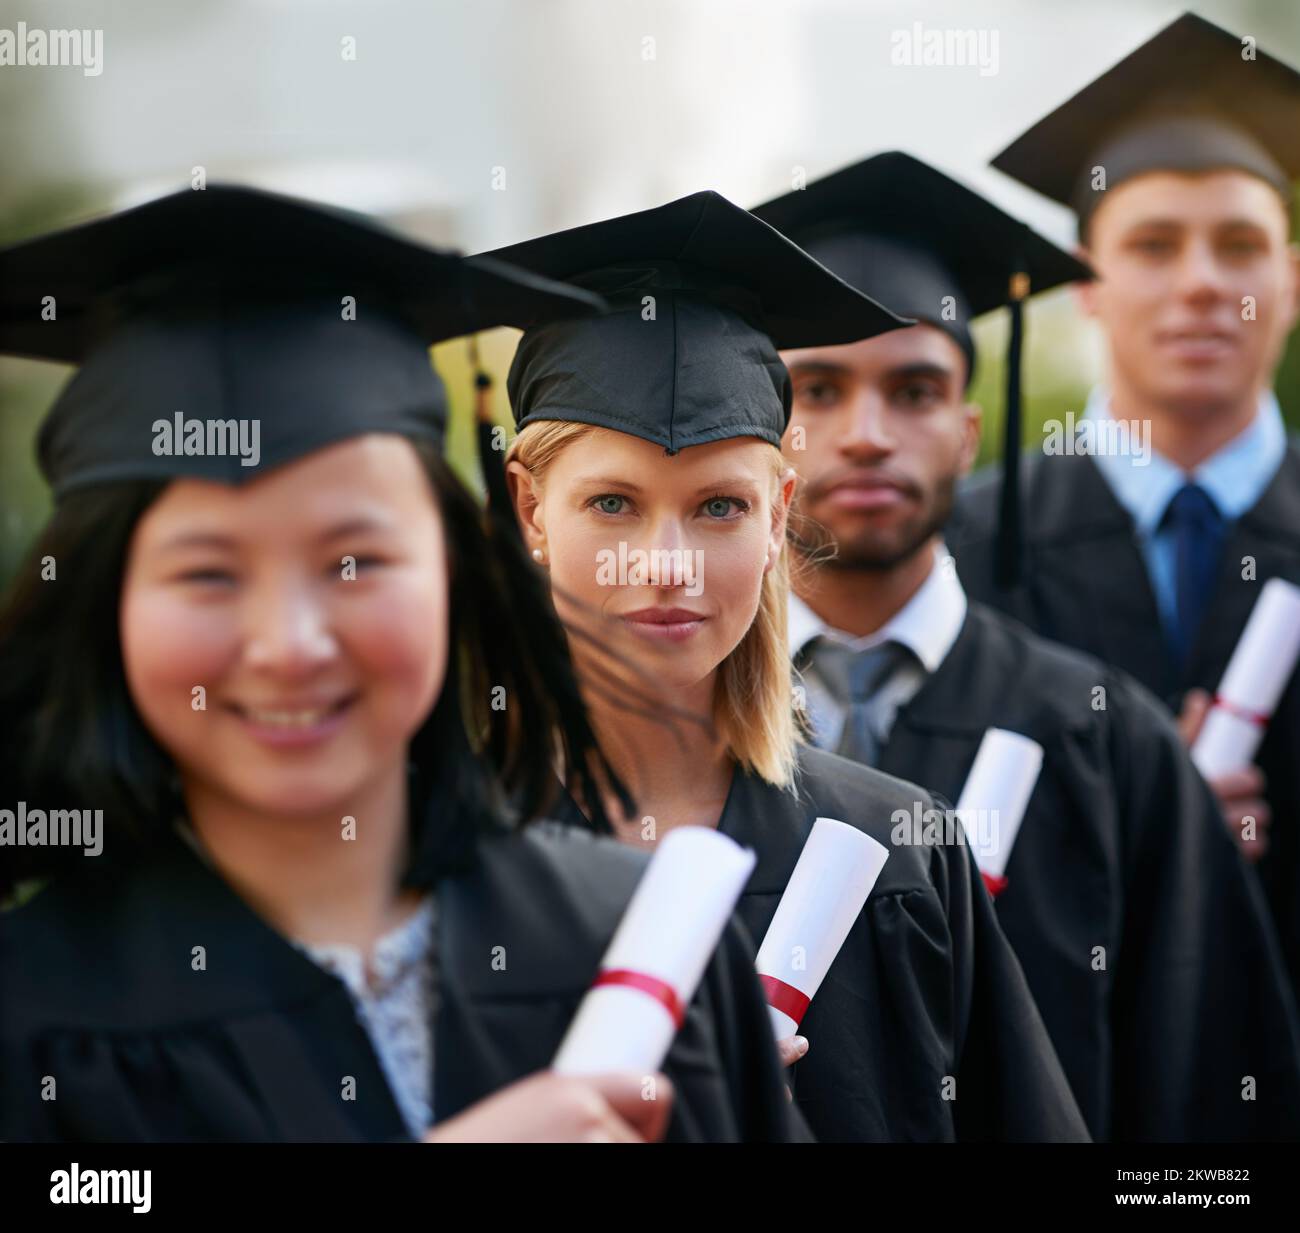 It pays to study. A group of college graduates standing in cap and gown and holding their diplomas. Stock Photo